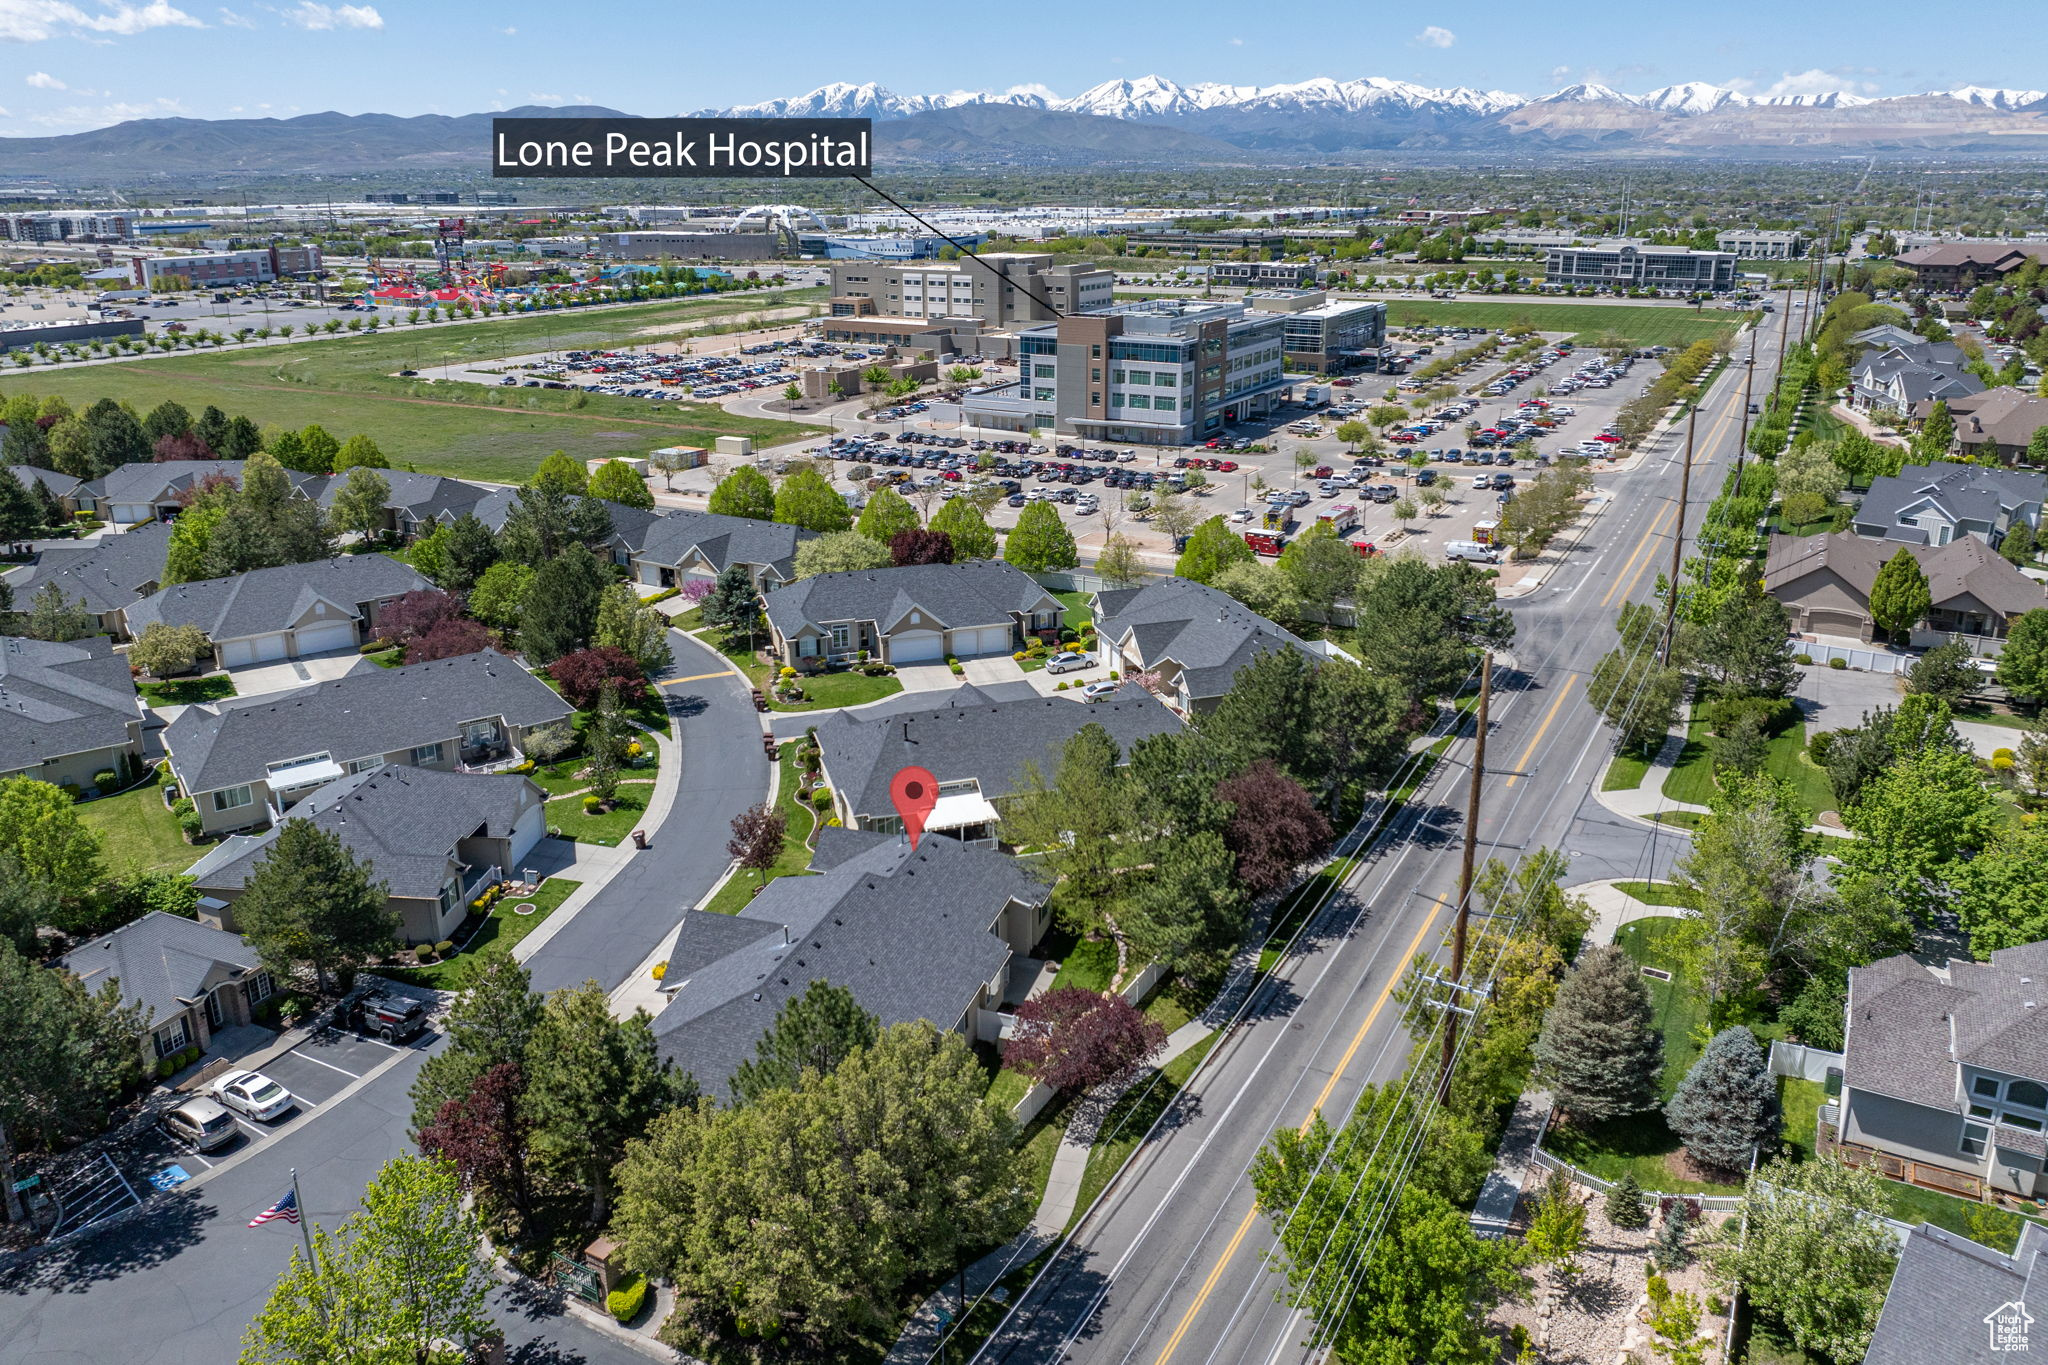 Bird's eye view featuring Lone Peak Hospital to the West